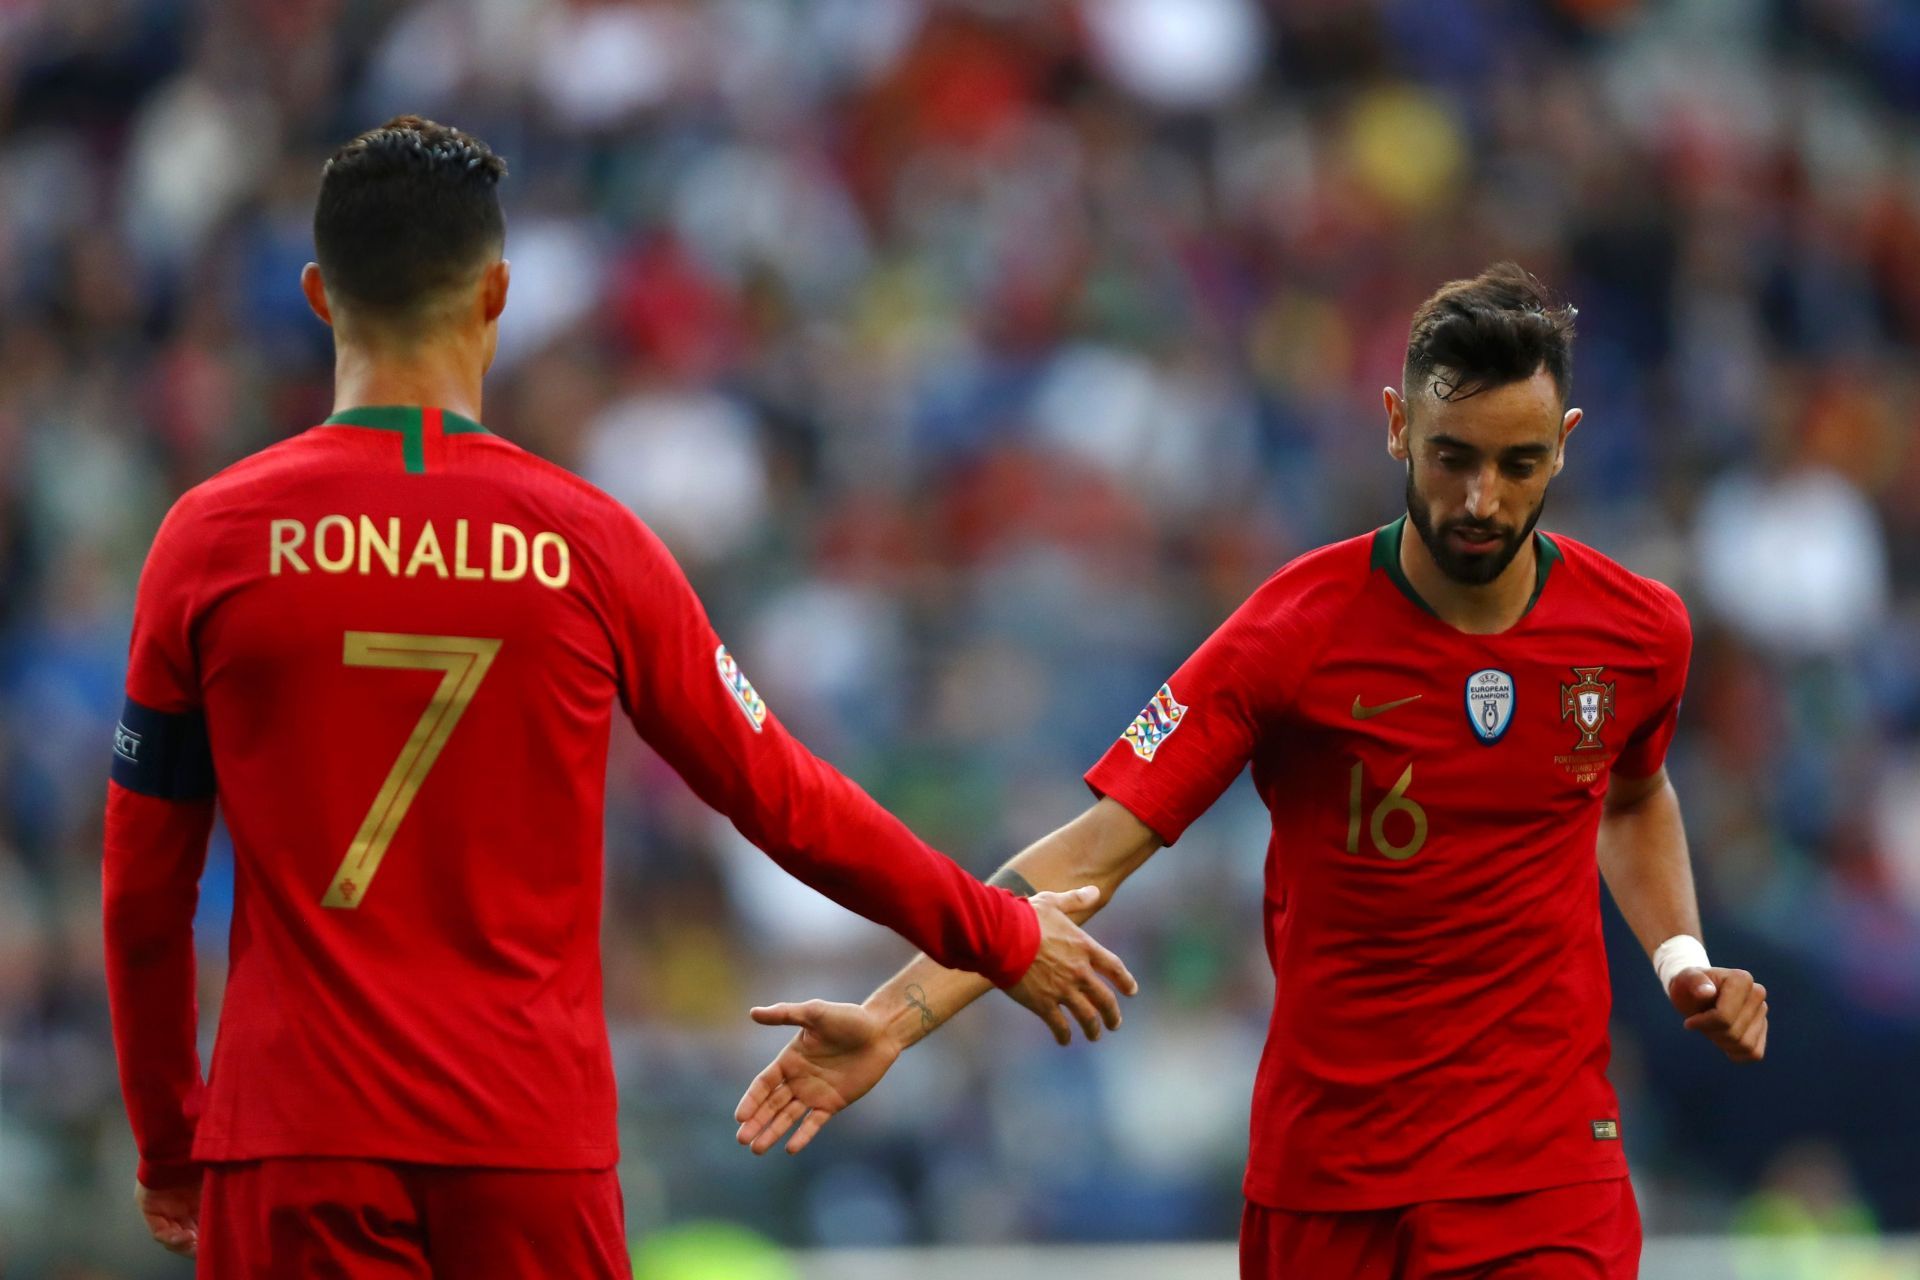 Portuguese pair Cristiano Ronaldo (L) and Bruno Fernandes failed to work as a cohesive unit at Manchester United.